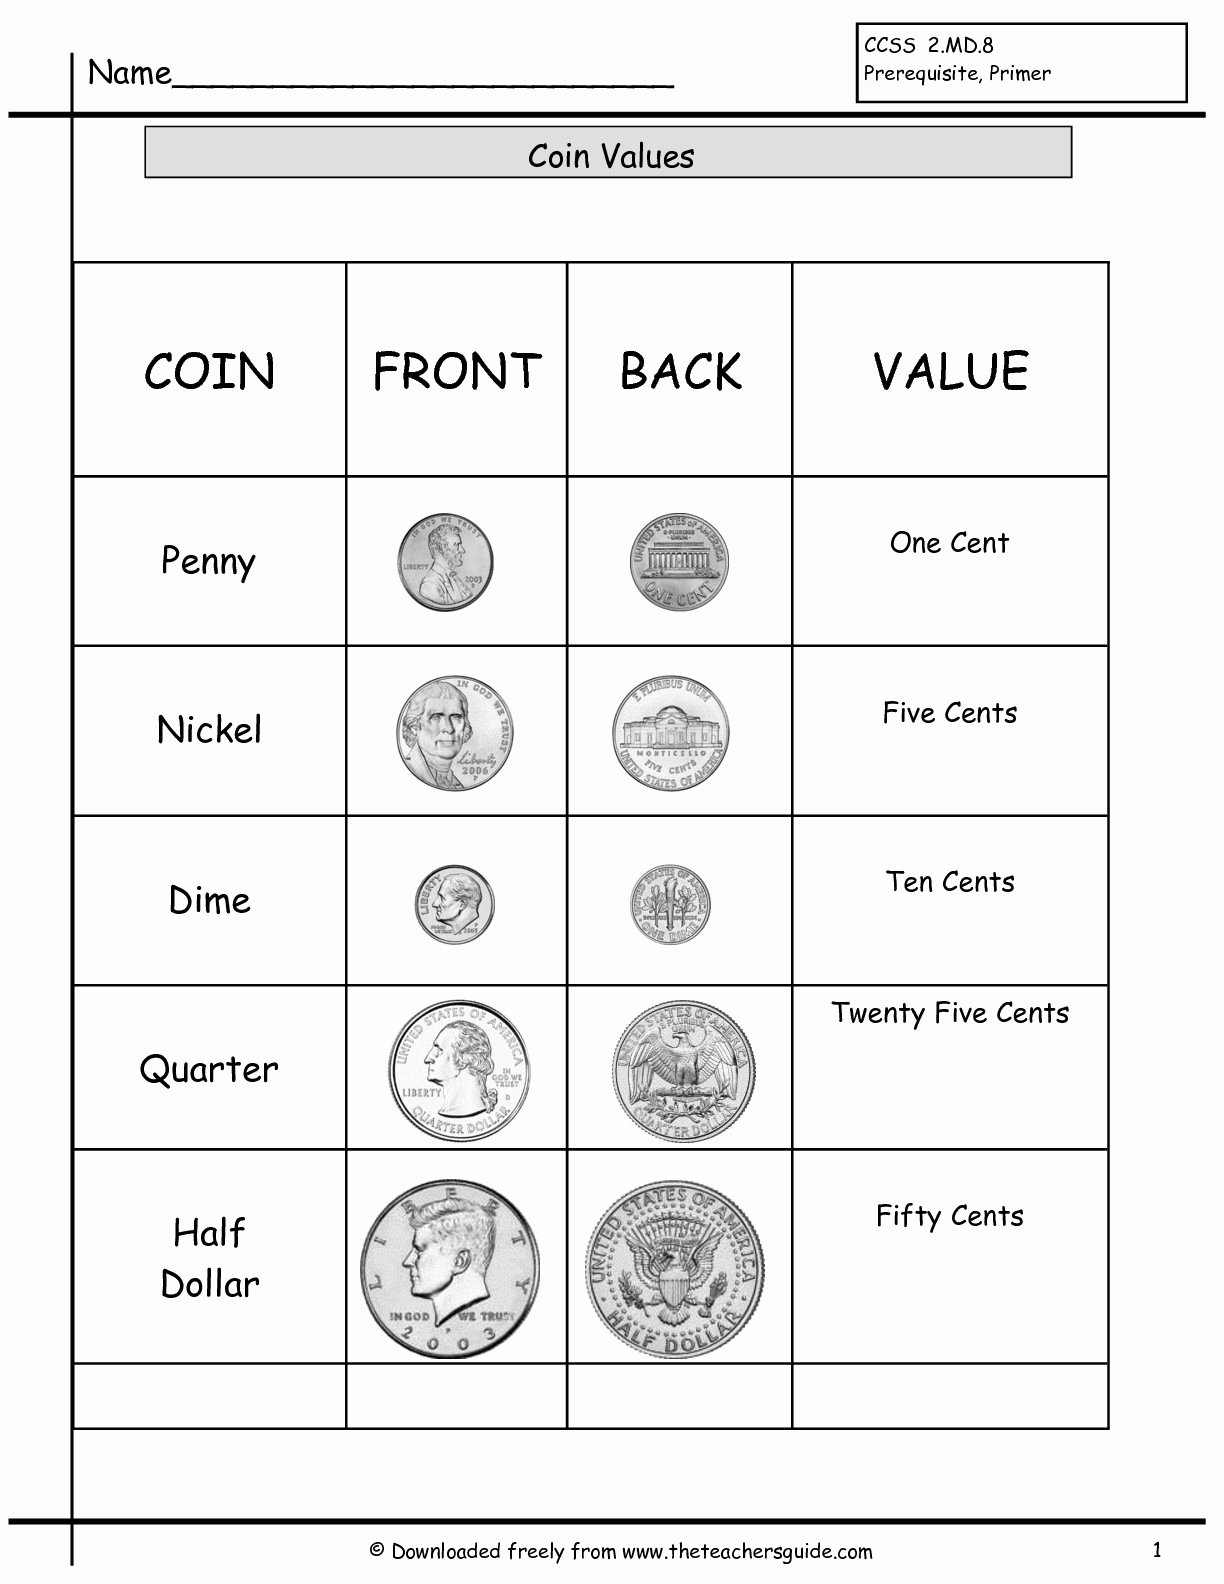 Values Of Coins Worksheet Fresh Counting Coins Worksheets From the Teacher S Guide